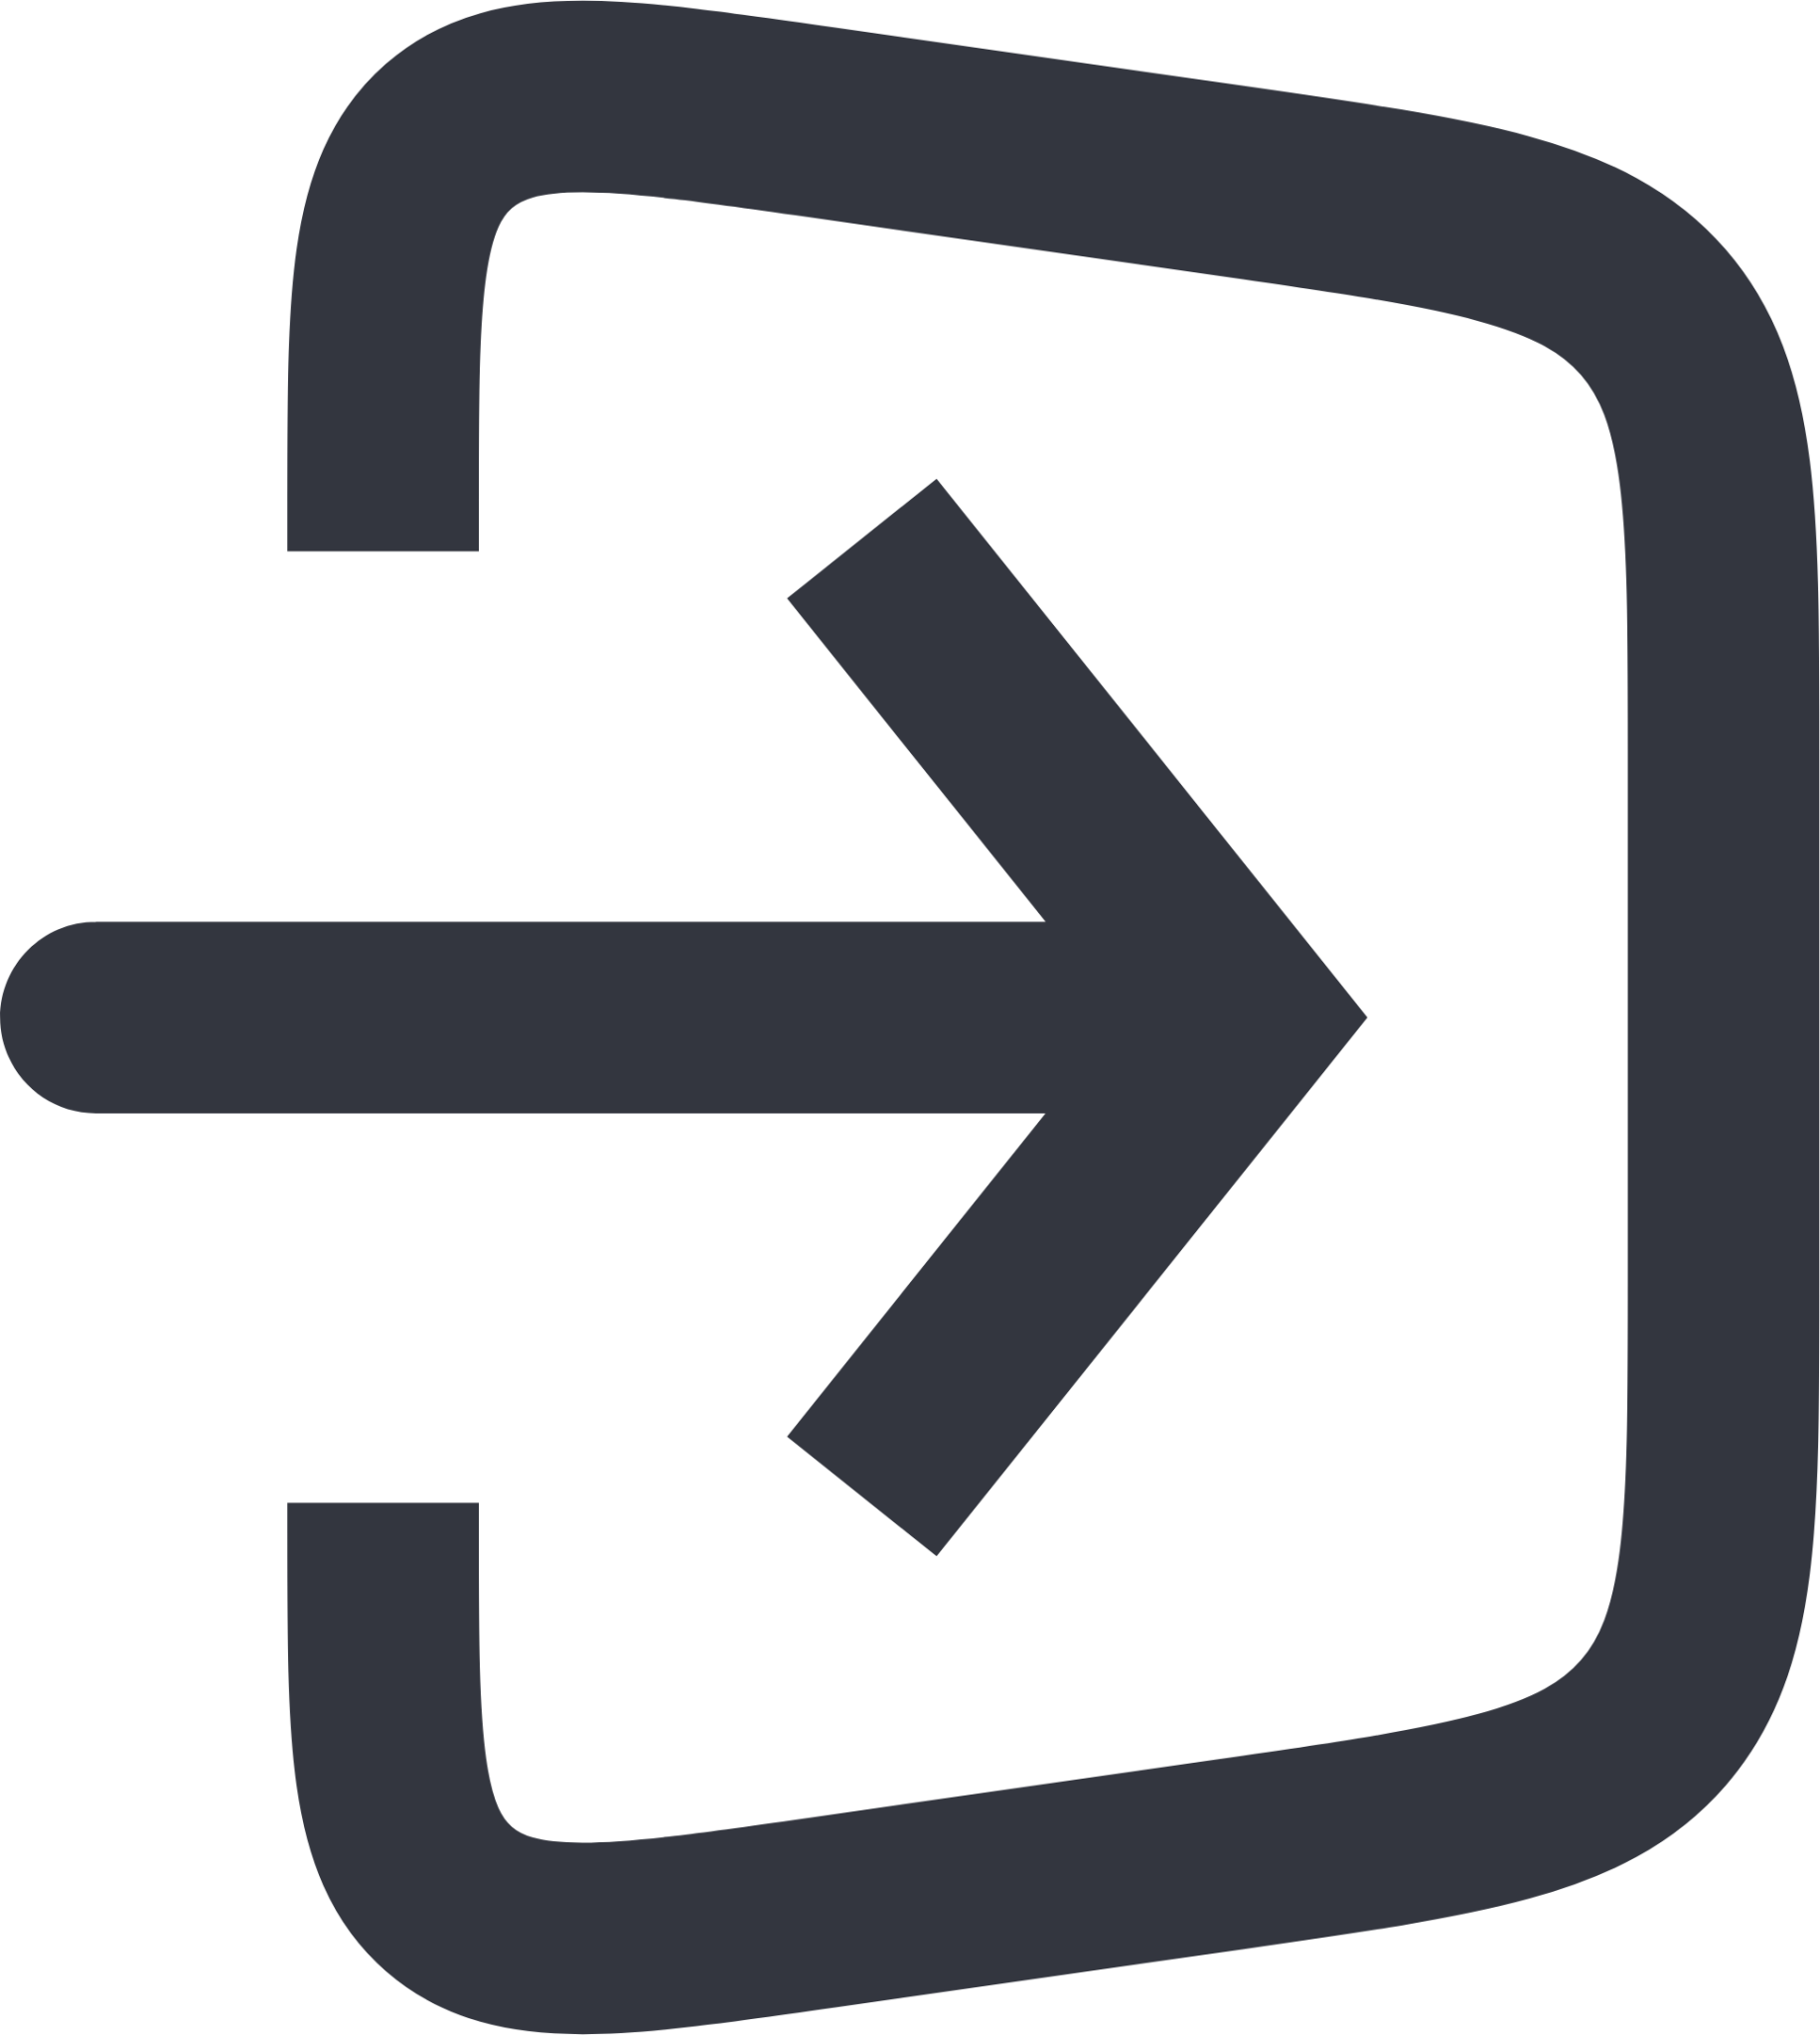 Sign in squre icon